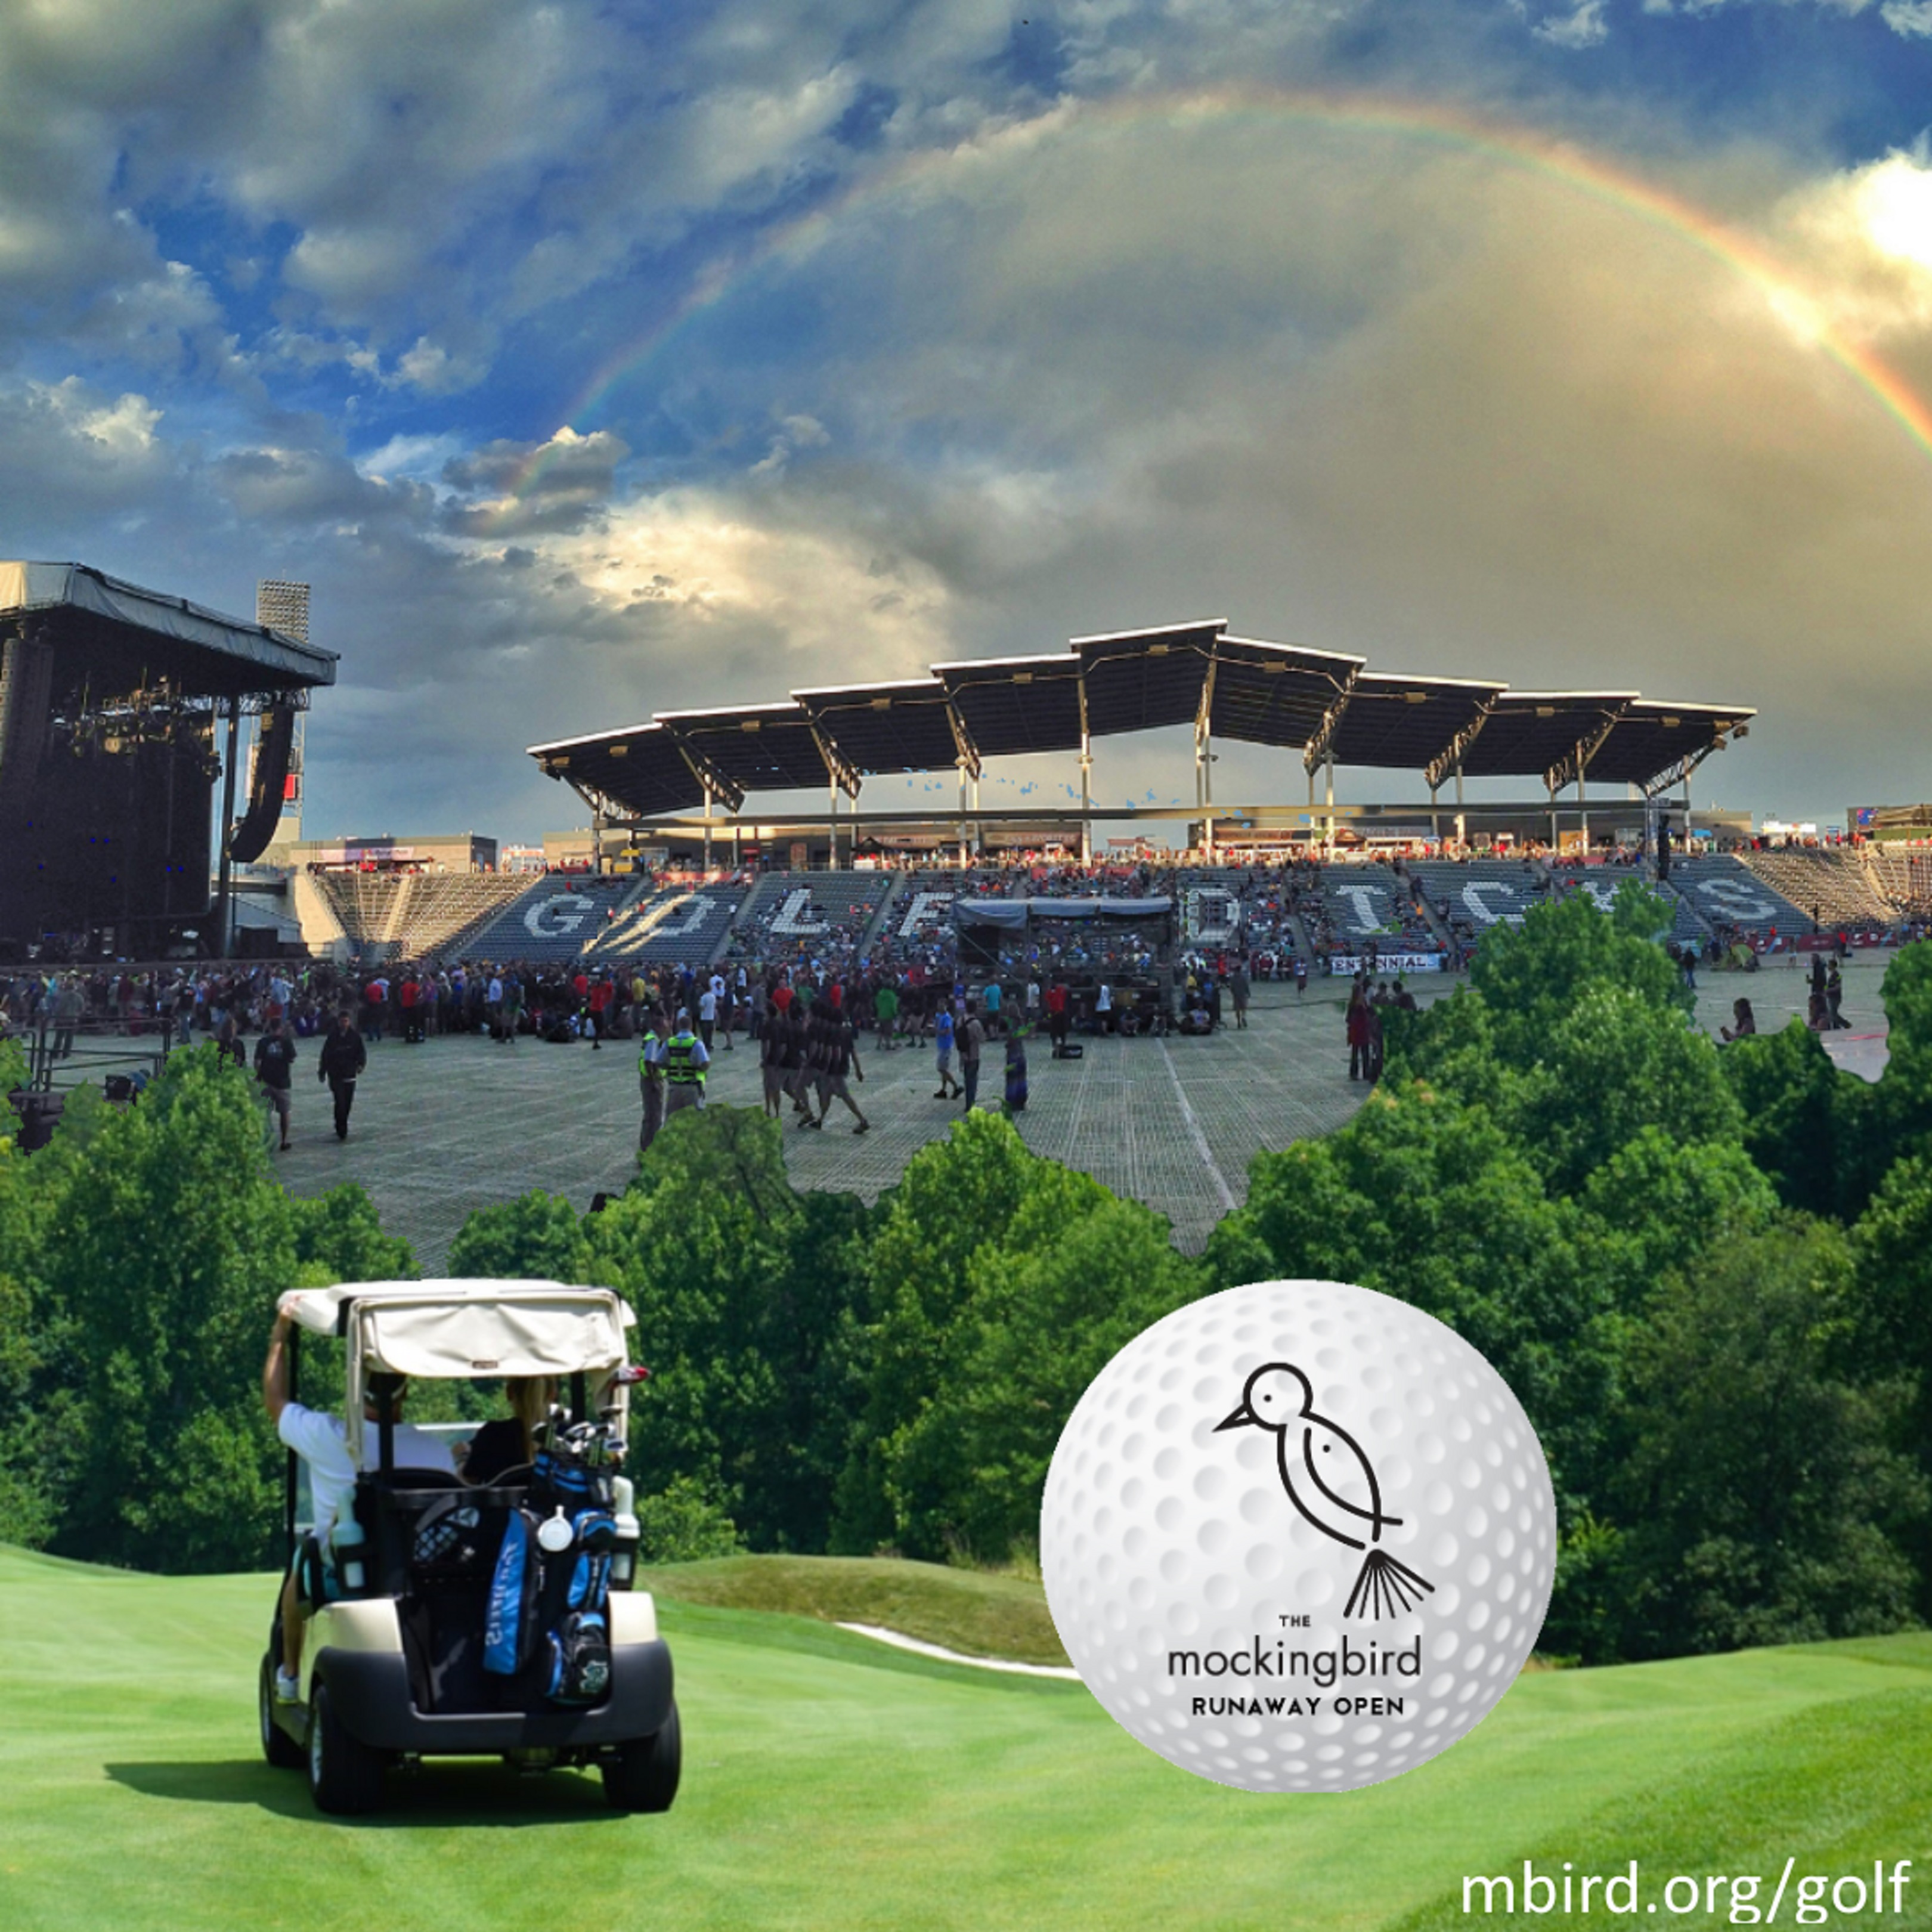 Sixth Annual Runaway Open charity golf tournament for Phish fans